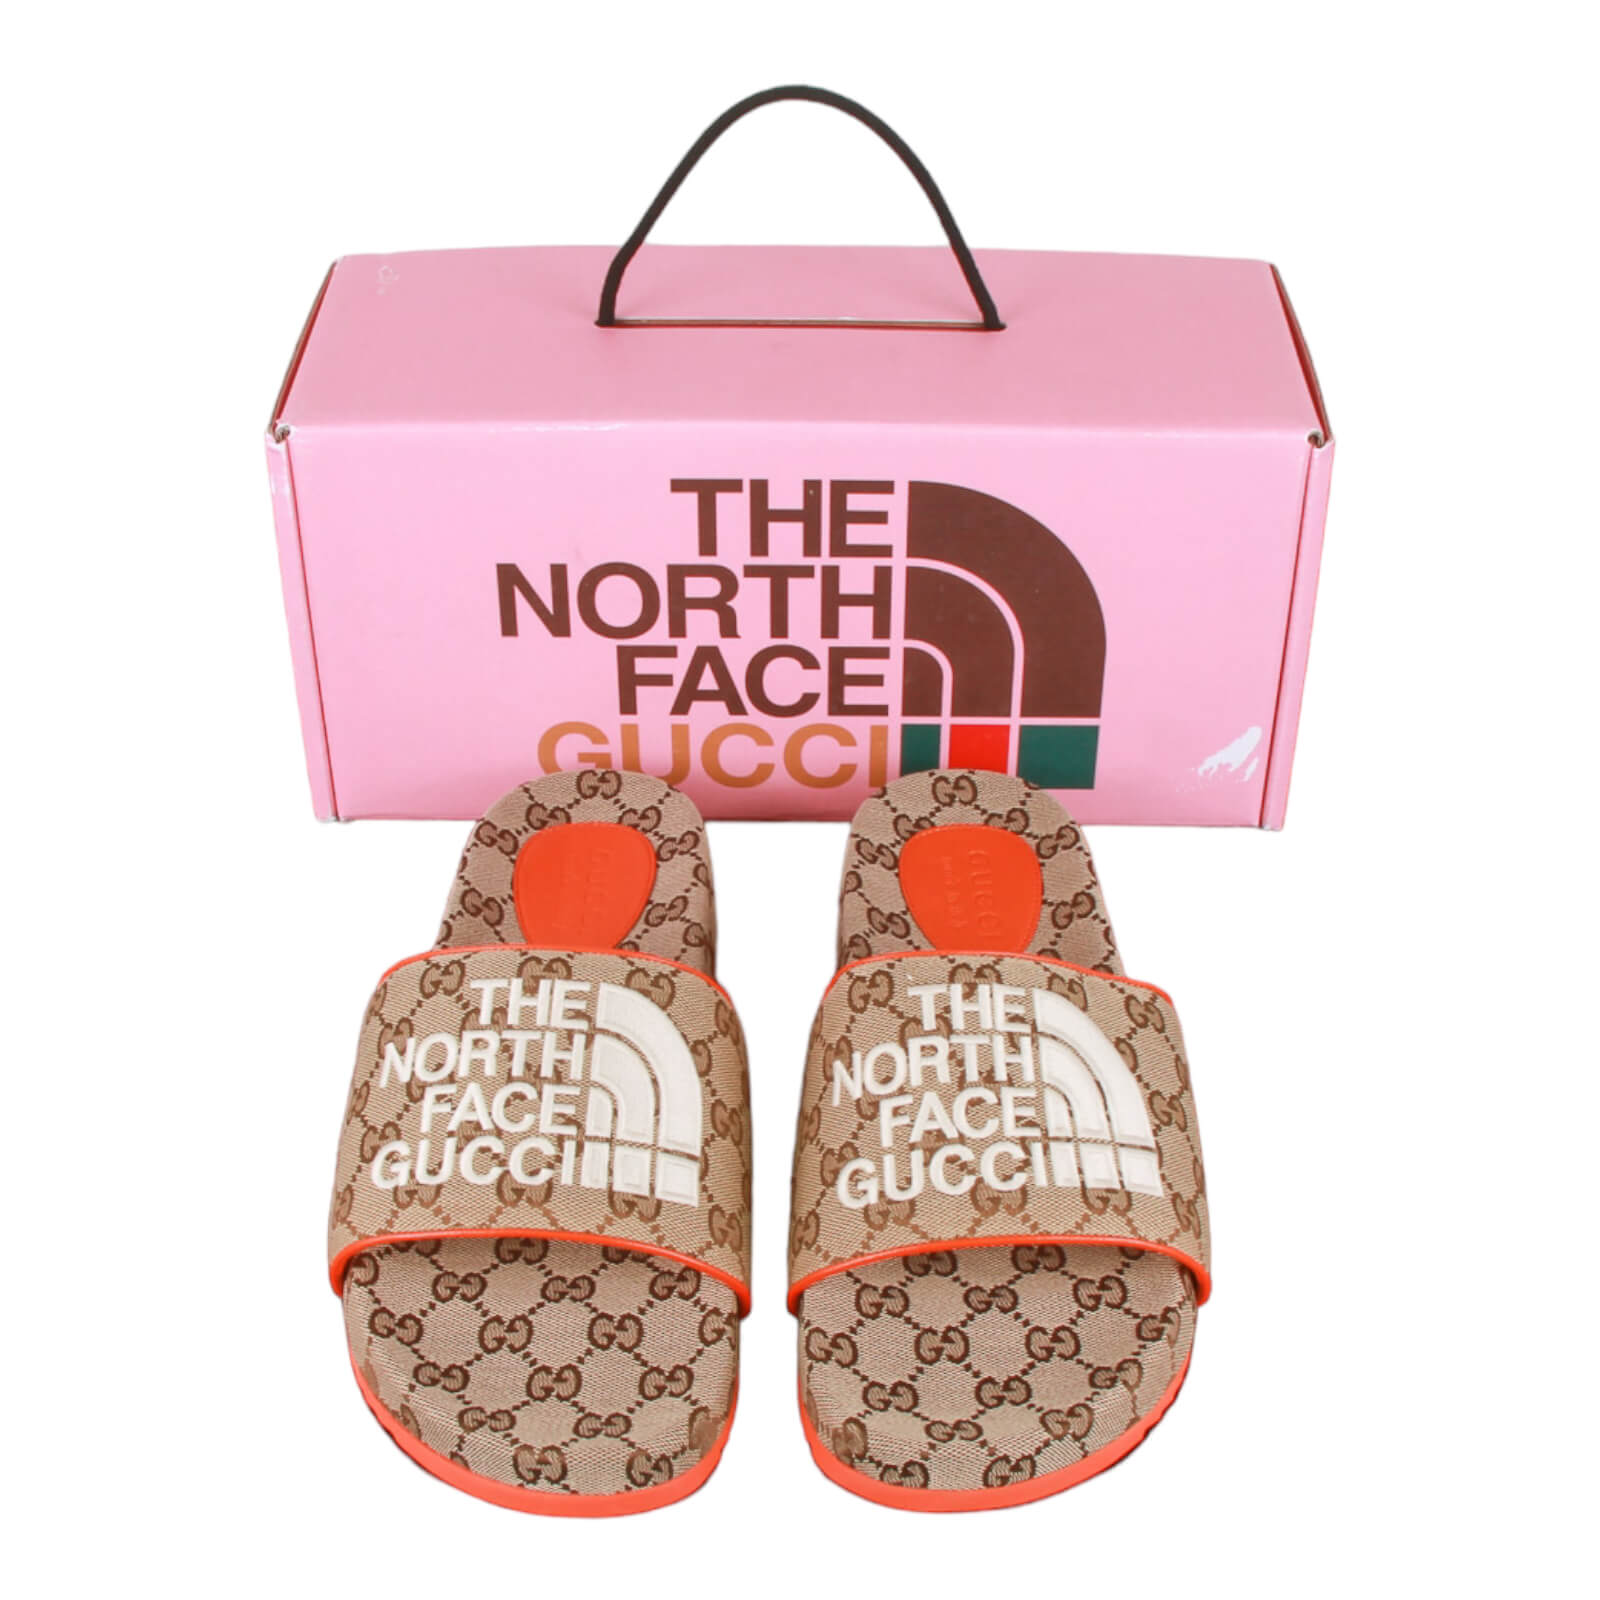 Authentic GUCCI x THE NORTH FACE GG CANVAS SLIDES SIZE: 9